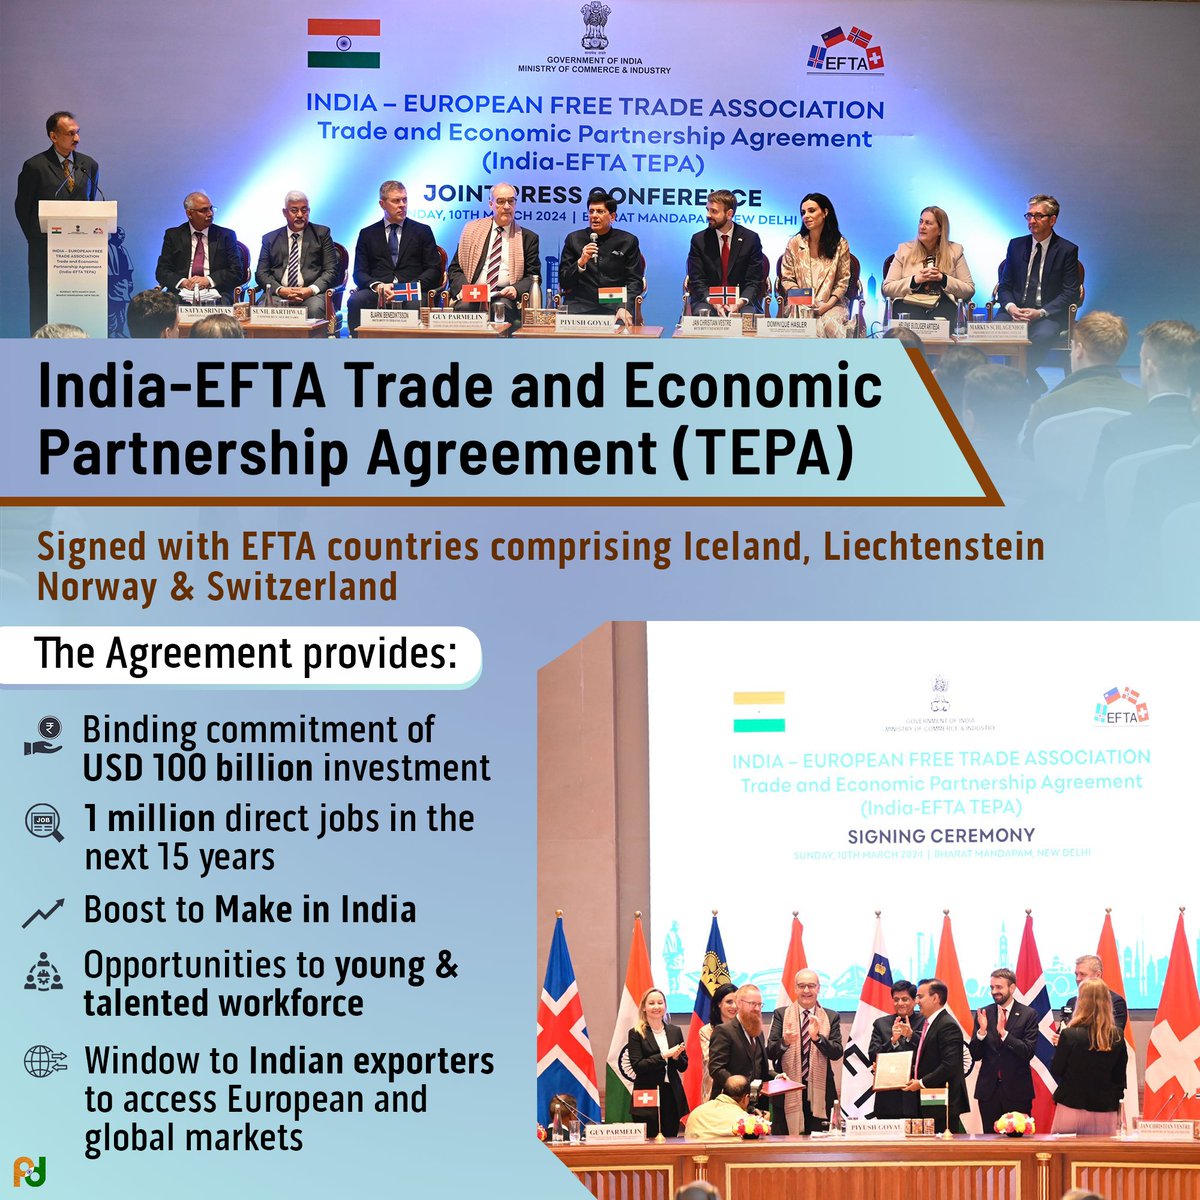 A historic milestone for #BemisaalBharat!

India & European Free Trade Association (🇮🇸🇳🇴🇱🇮🇨🇭) signed a Trade and Economic Partnership Agreement (TEPA) in New Delhi today. 

The pathbreaking agreement promises to:
👉Promote investment
👉 Create employment opportunities 
👉 Boost